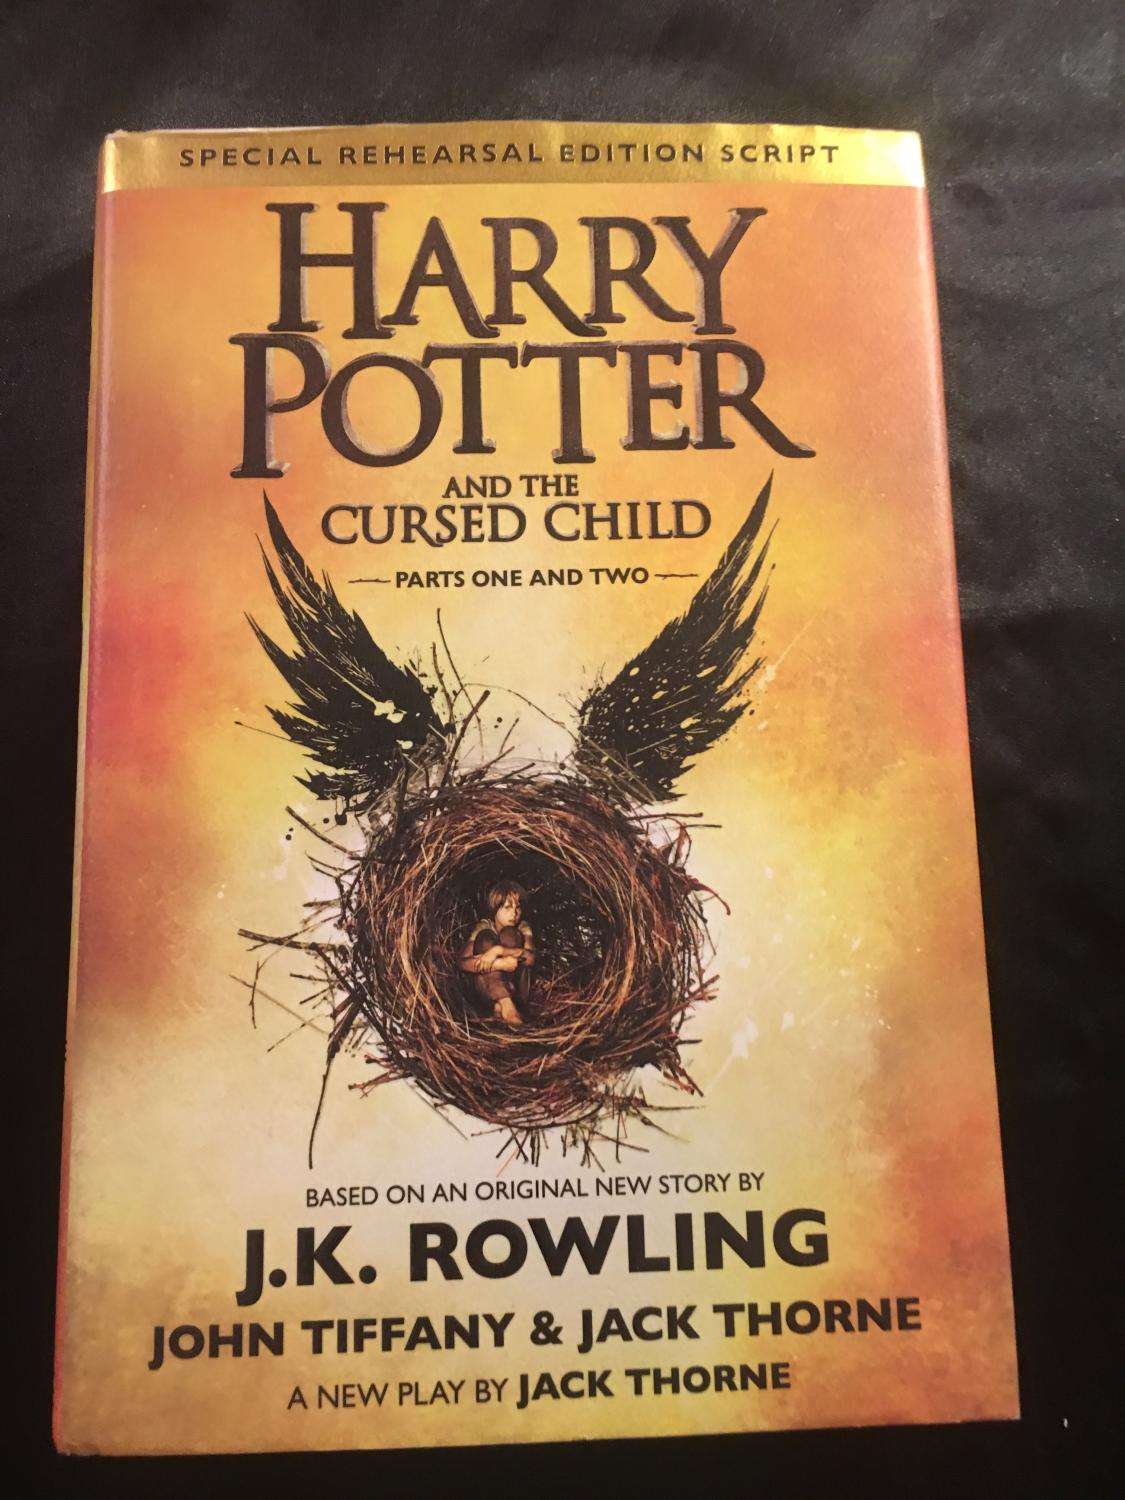 Harry potter and the cursed child book preview ...